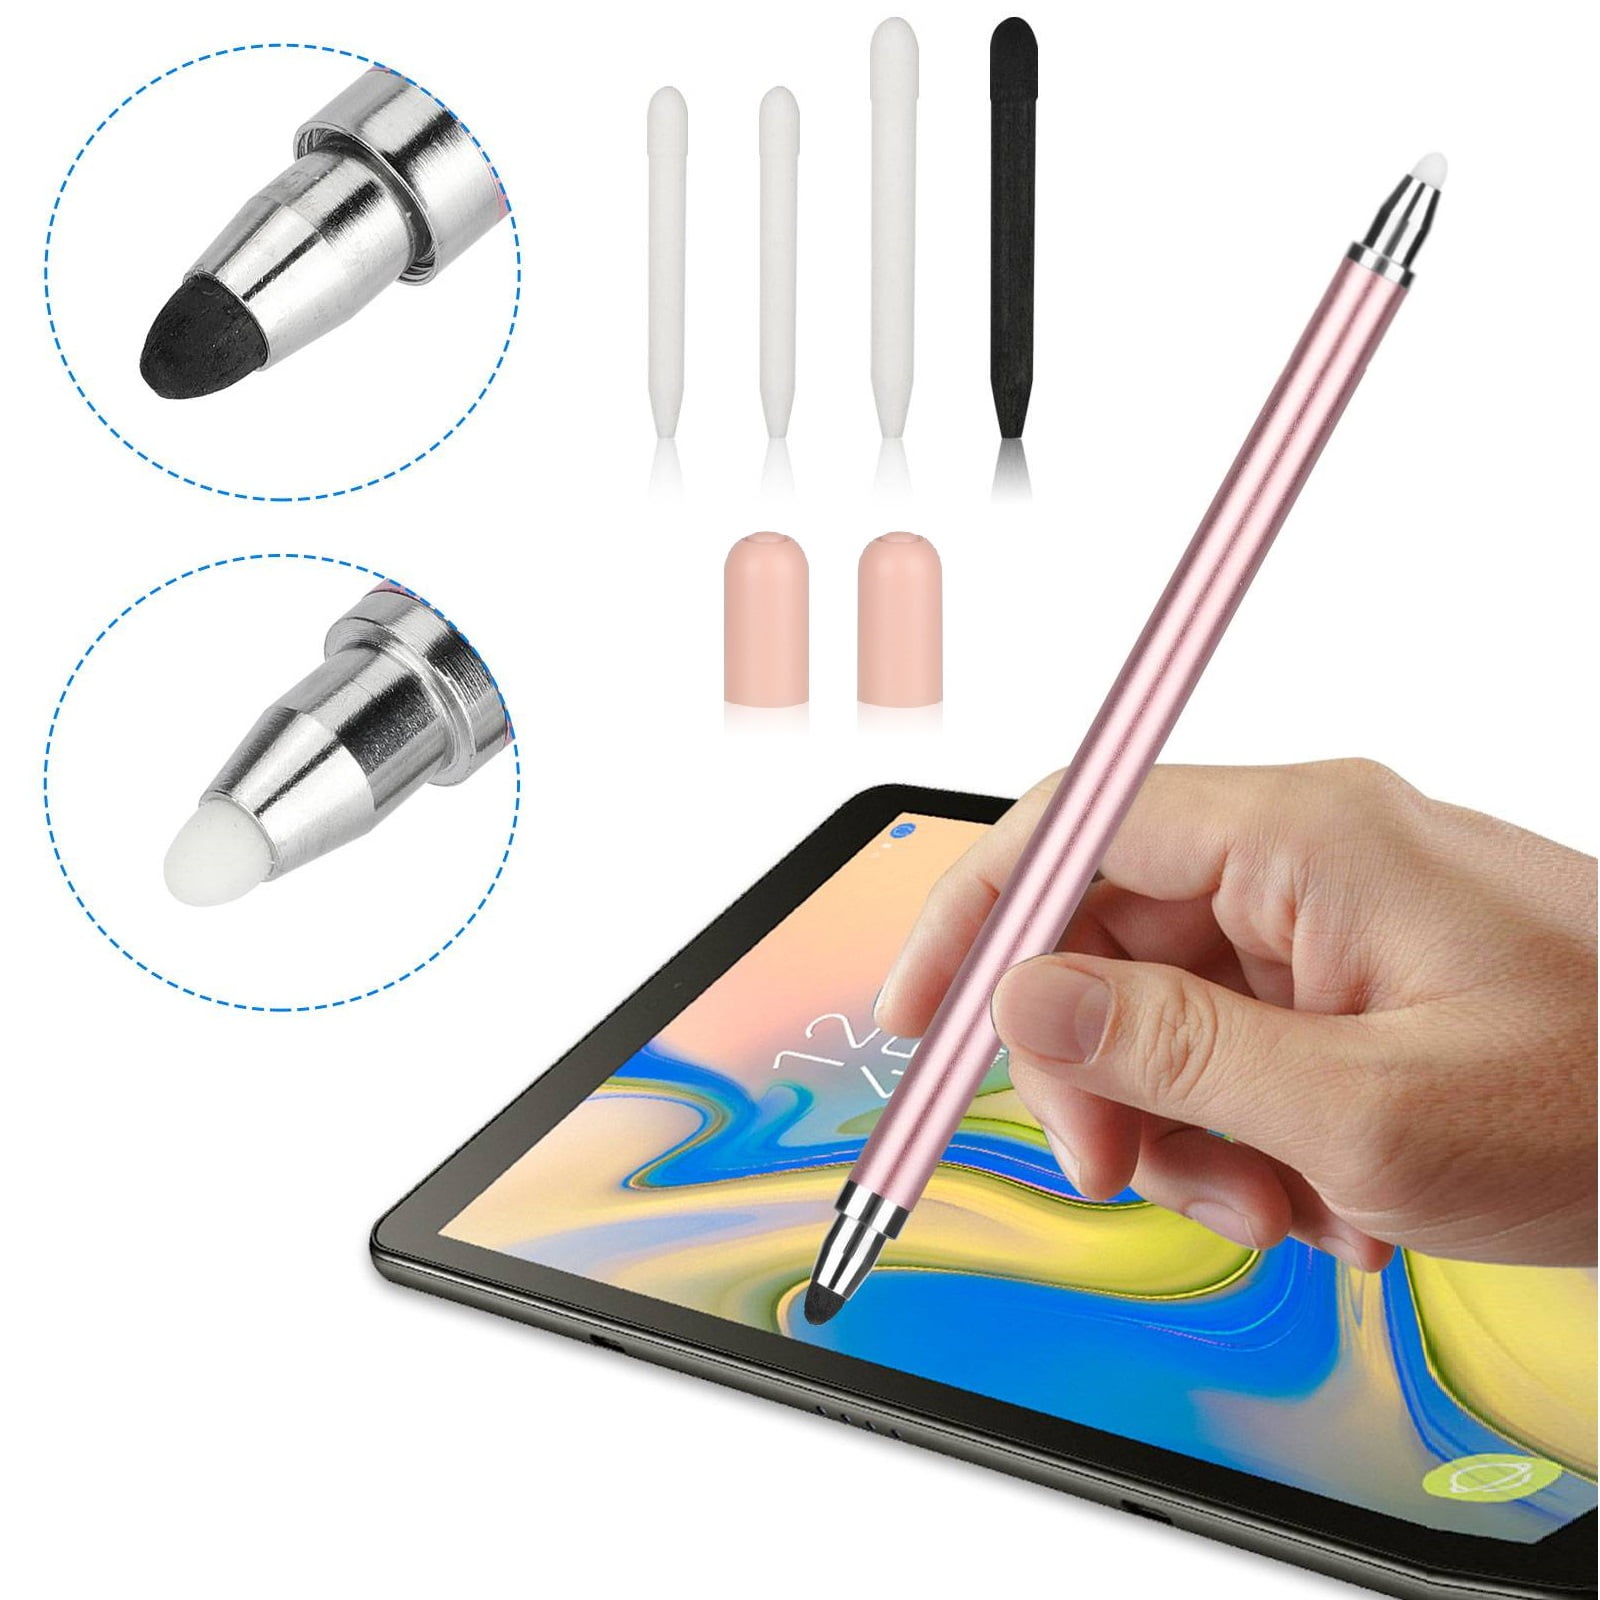 2 in1 Touch Screen Pen Stylus Universal For iPhone iPad Samsung Tablet Phone PC 